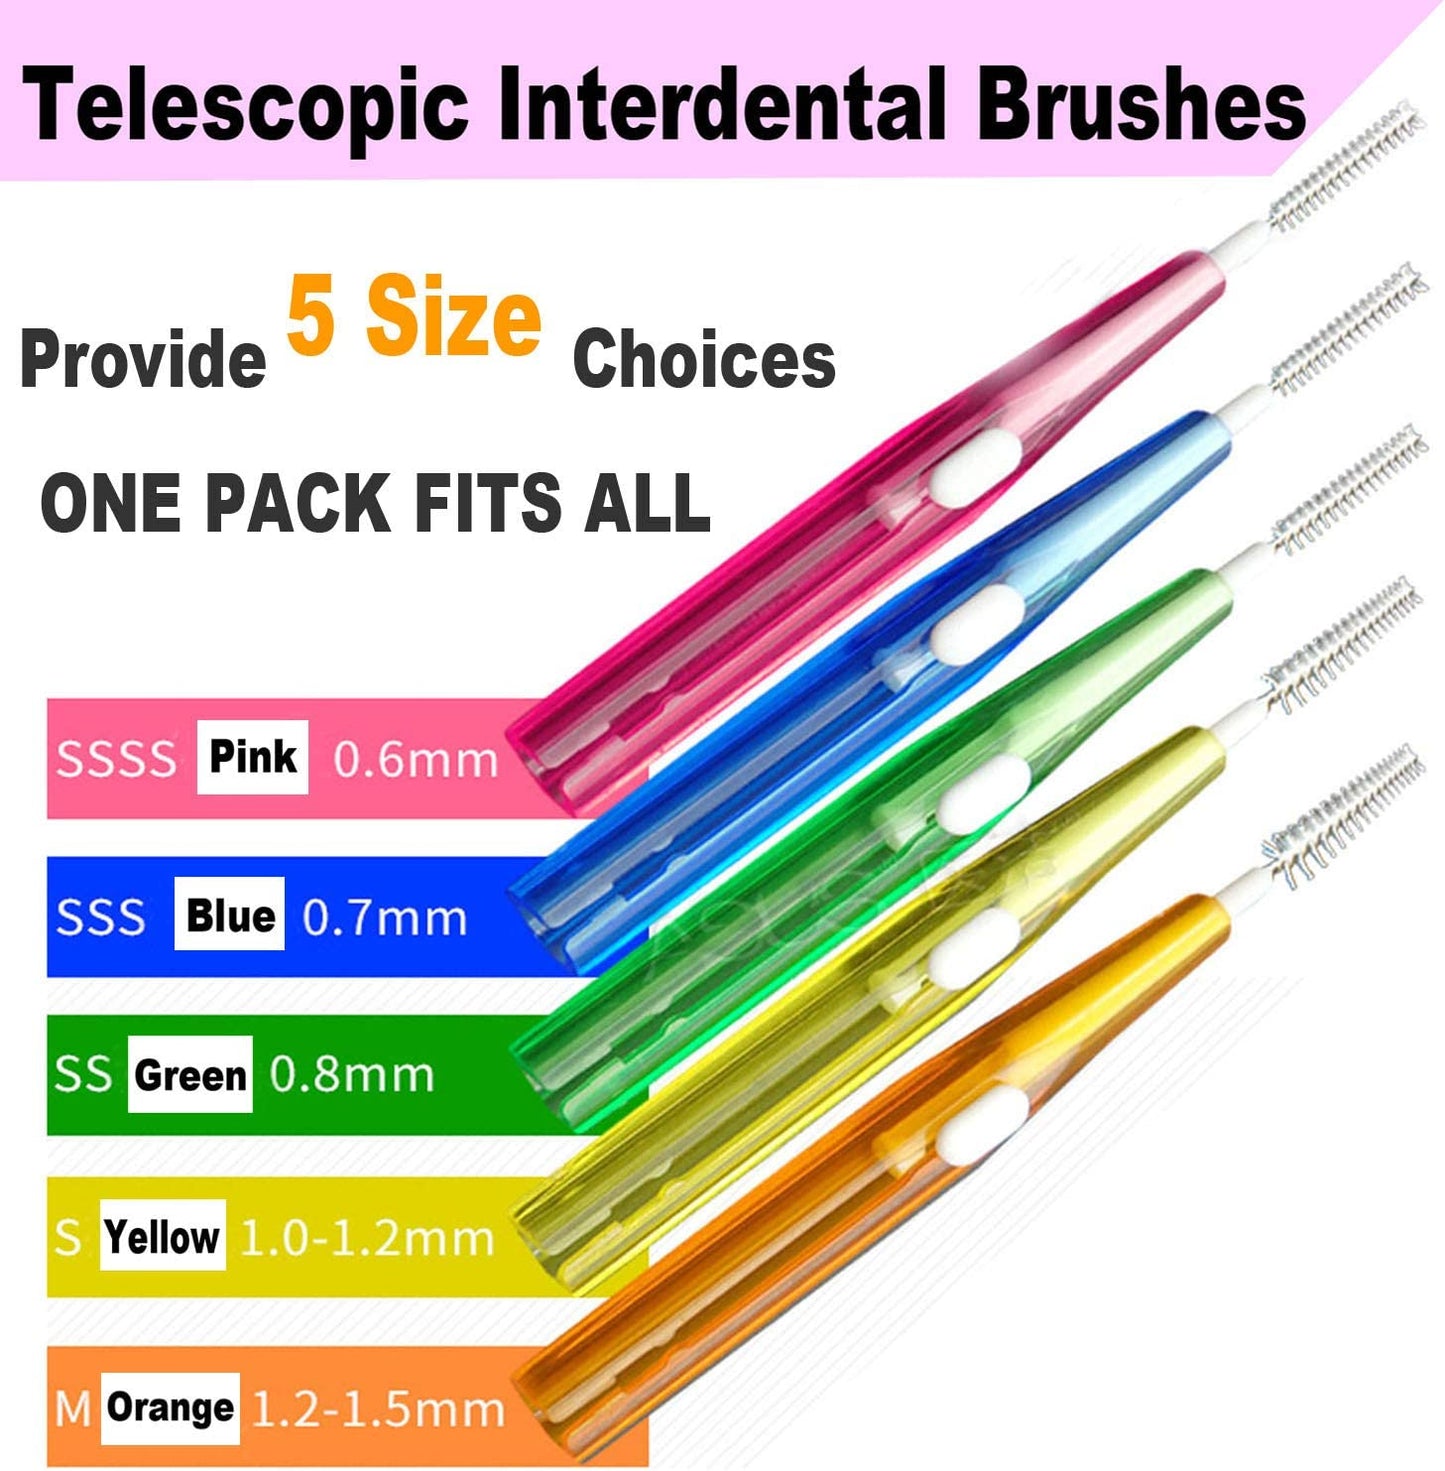 Interdental Brushes 30pcs Mixed Pack with Sizes 0.6-1.5mm Tooth Dental Picks for Daily Oral Hygiene, Prevent Bad Breath and Periodontal Disease, Effective Interdental Cleaners Fit for Adult Children with Carrying Case